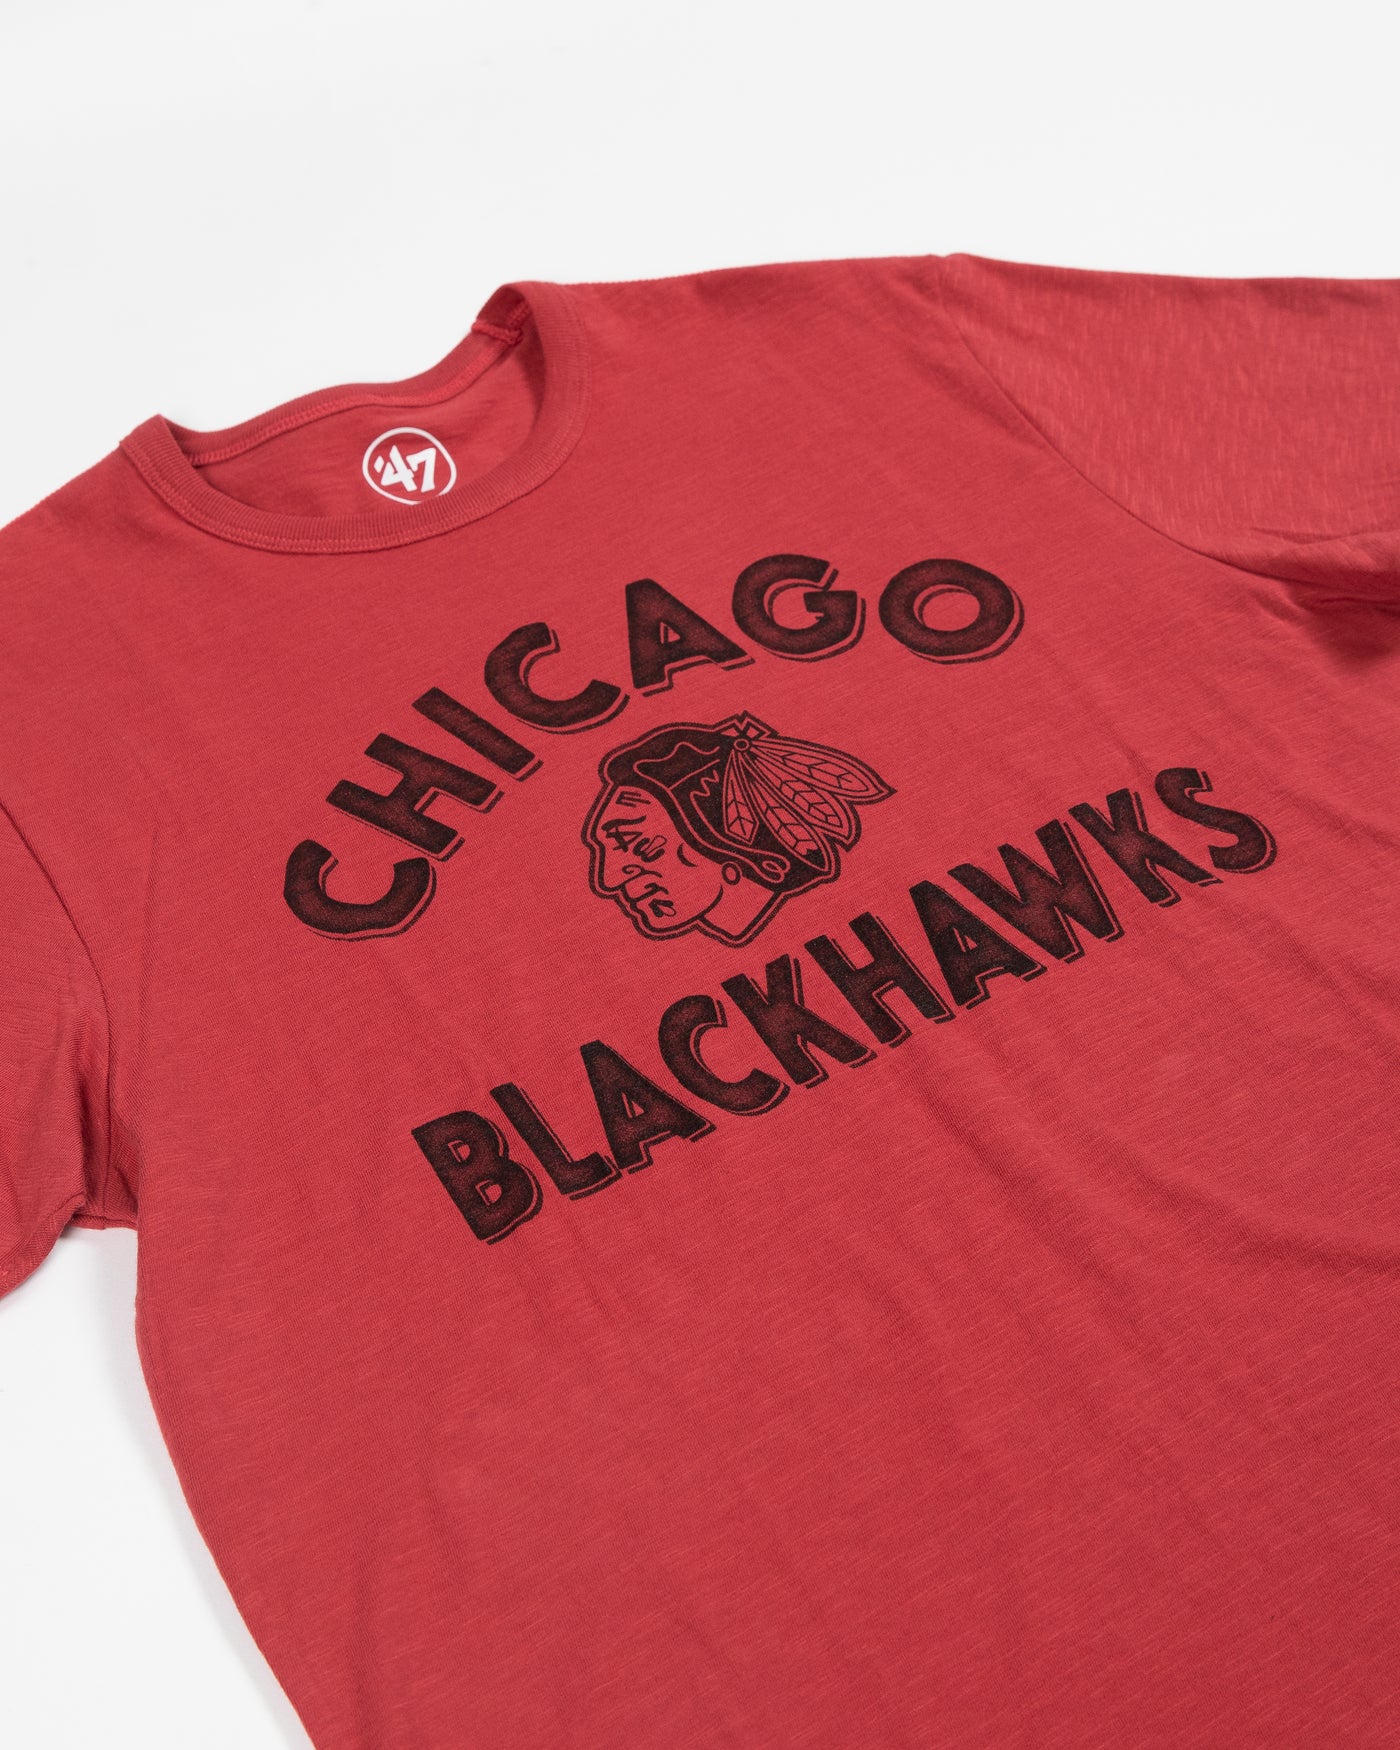 '47 brand red Chicago Blackhawks tee with primary logo - detail lay flat